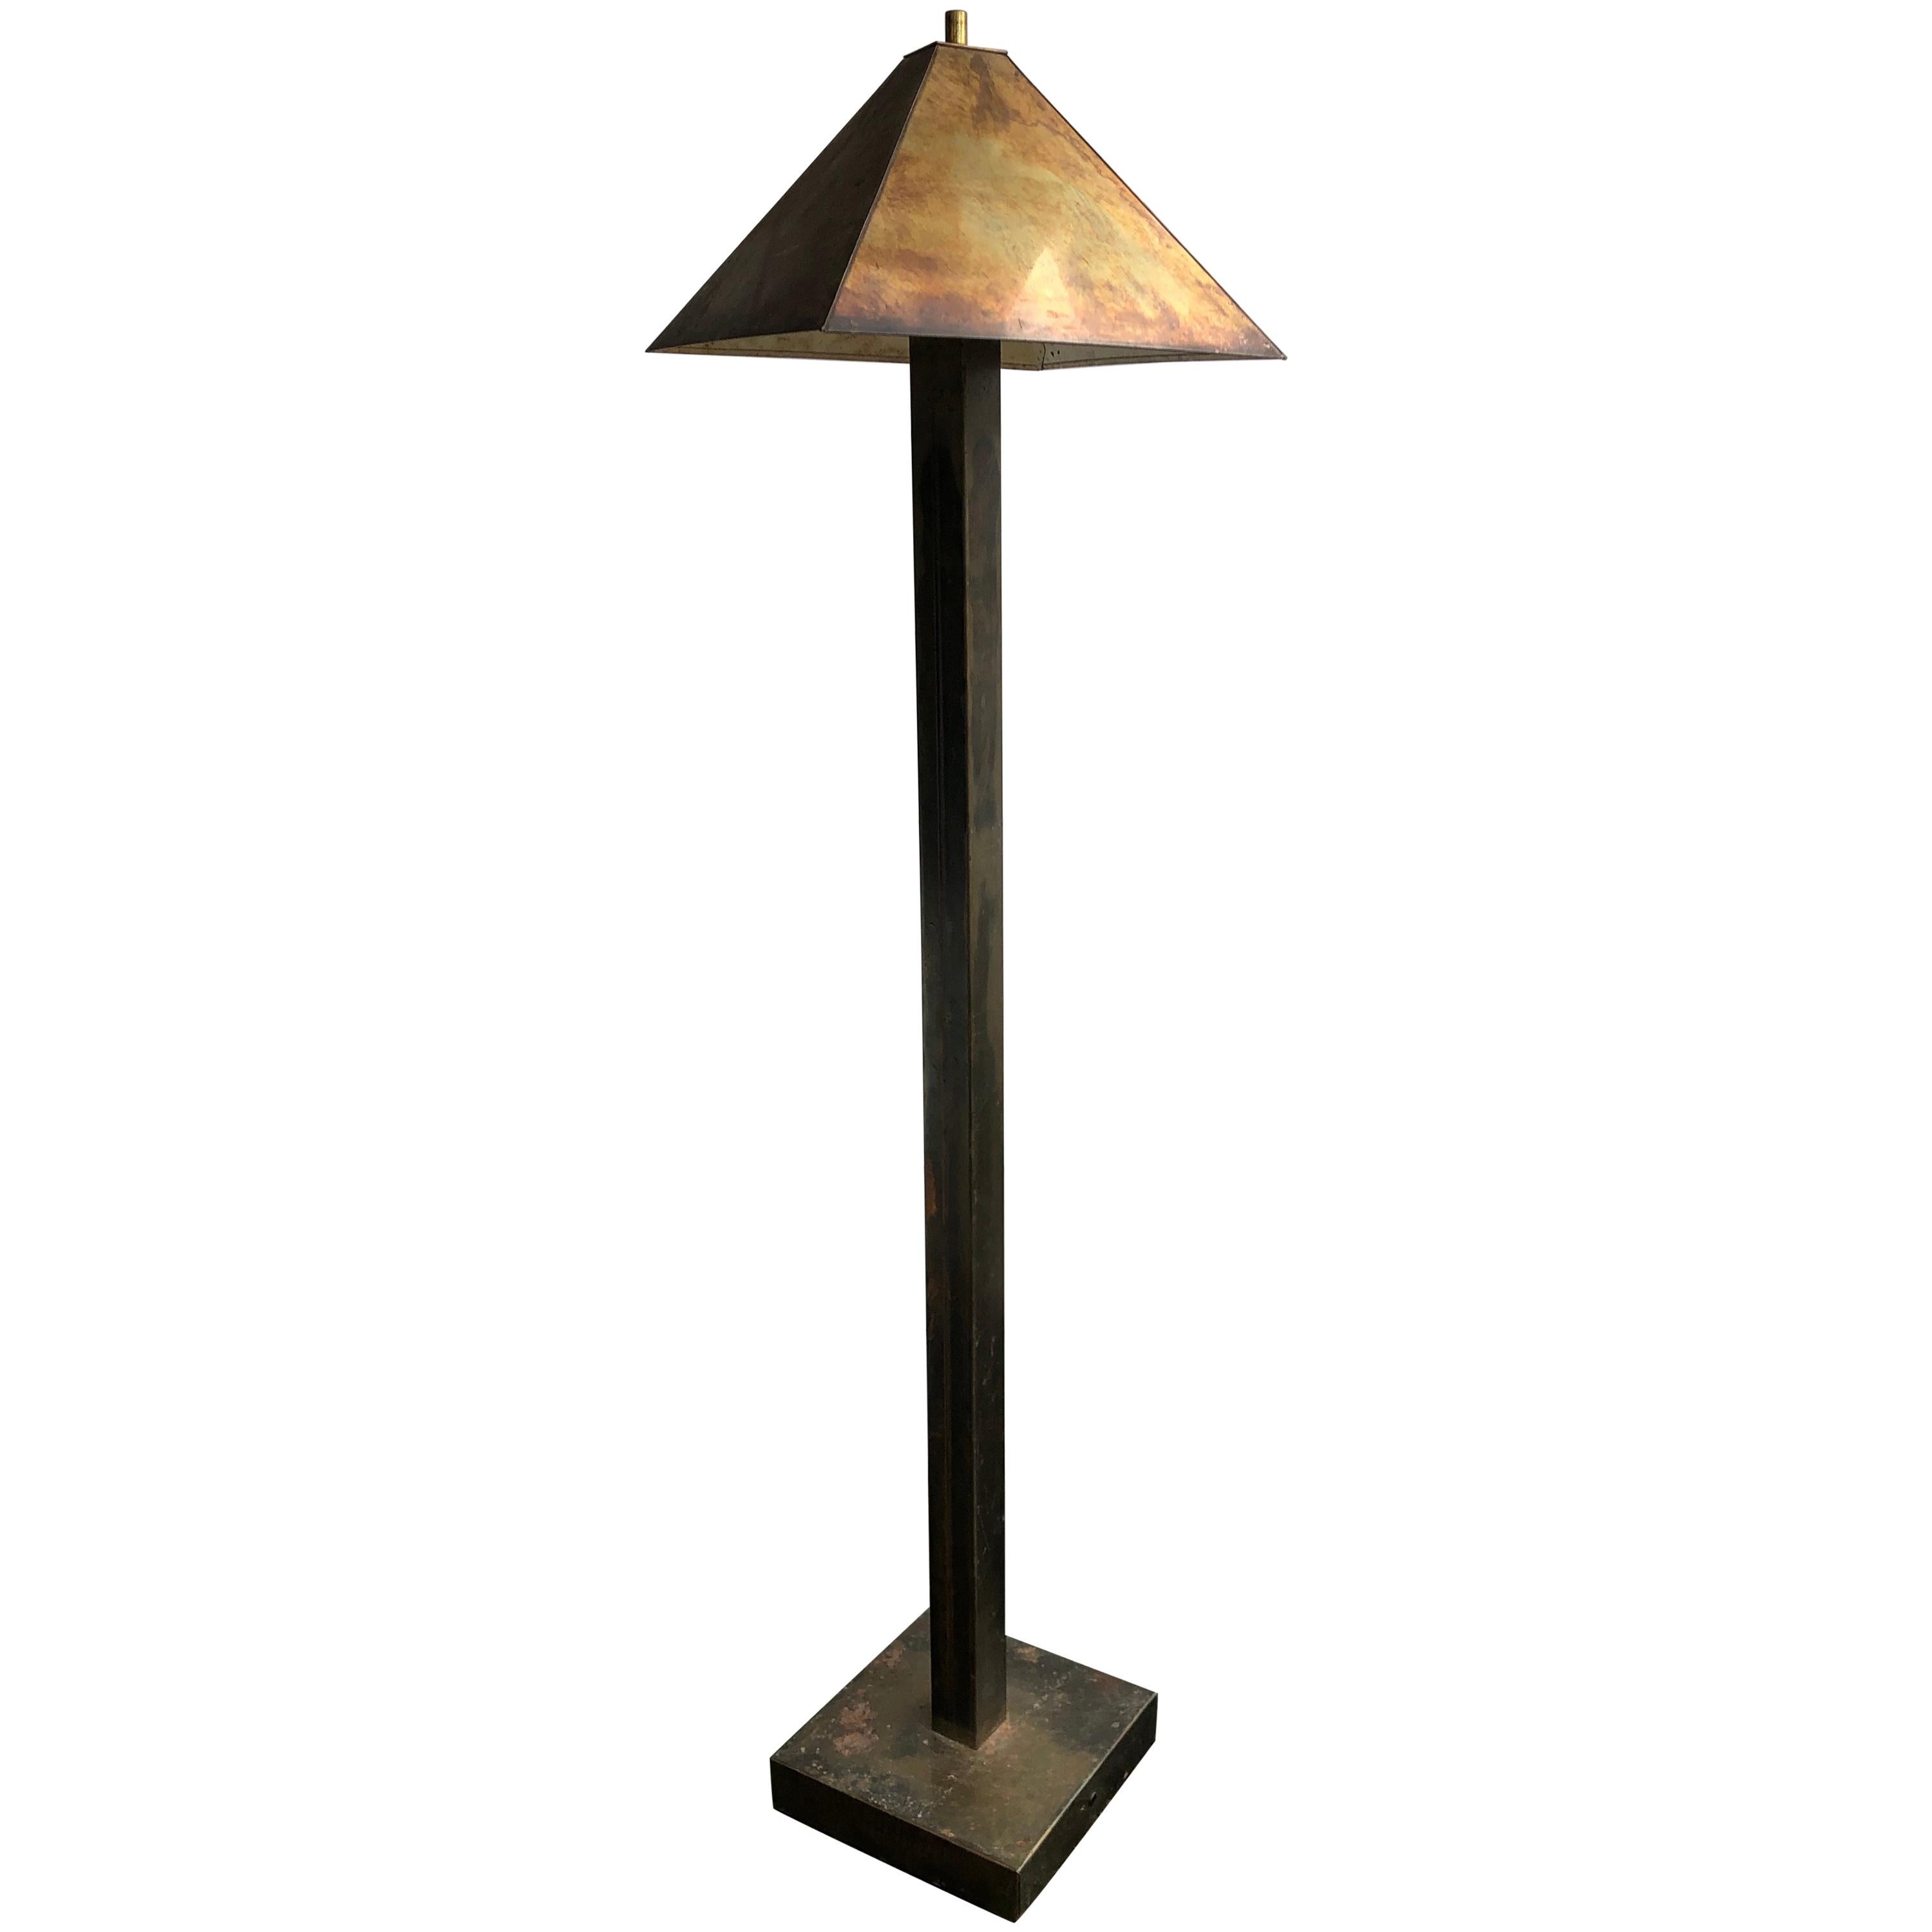  Brutalist Bronze Patinated Floor Lamp and Shade